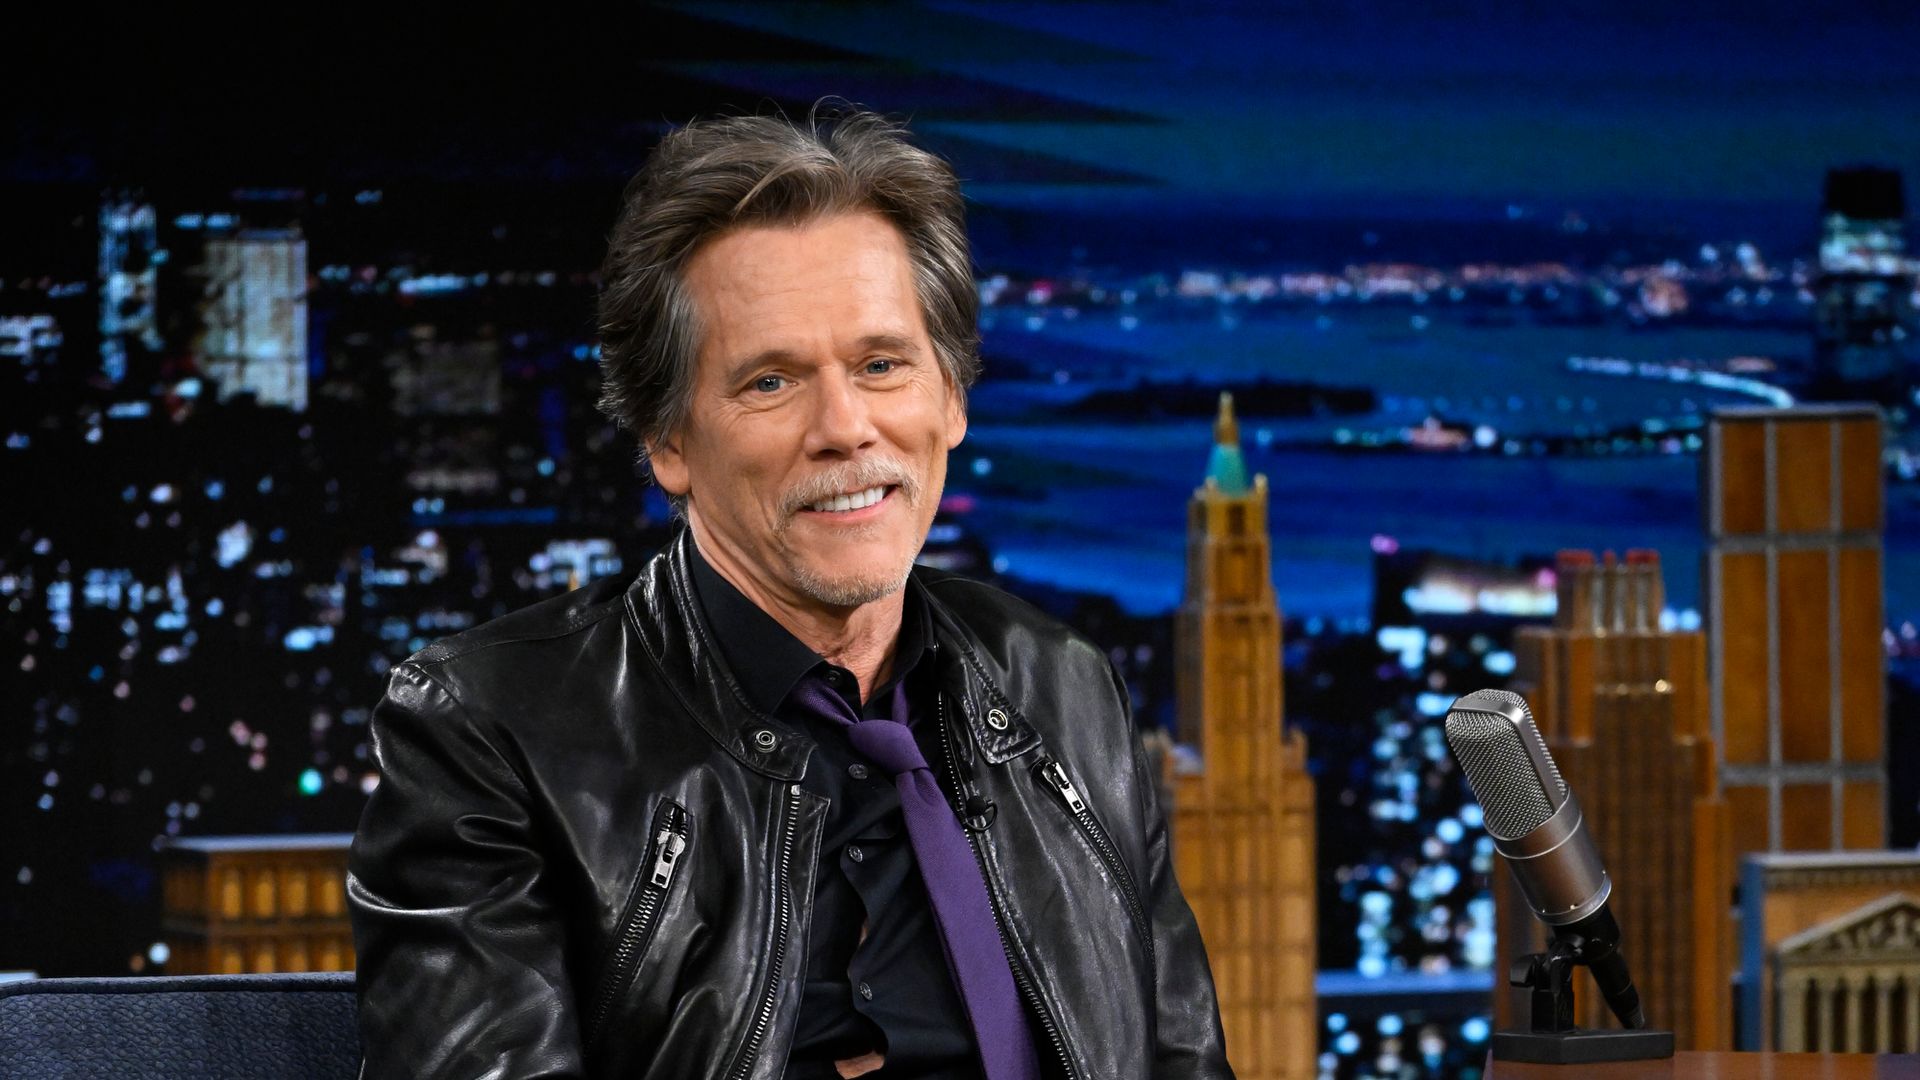 Kevin Bacon during an interview on Wednesday, March 29, 2023